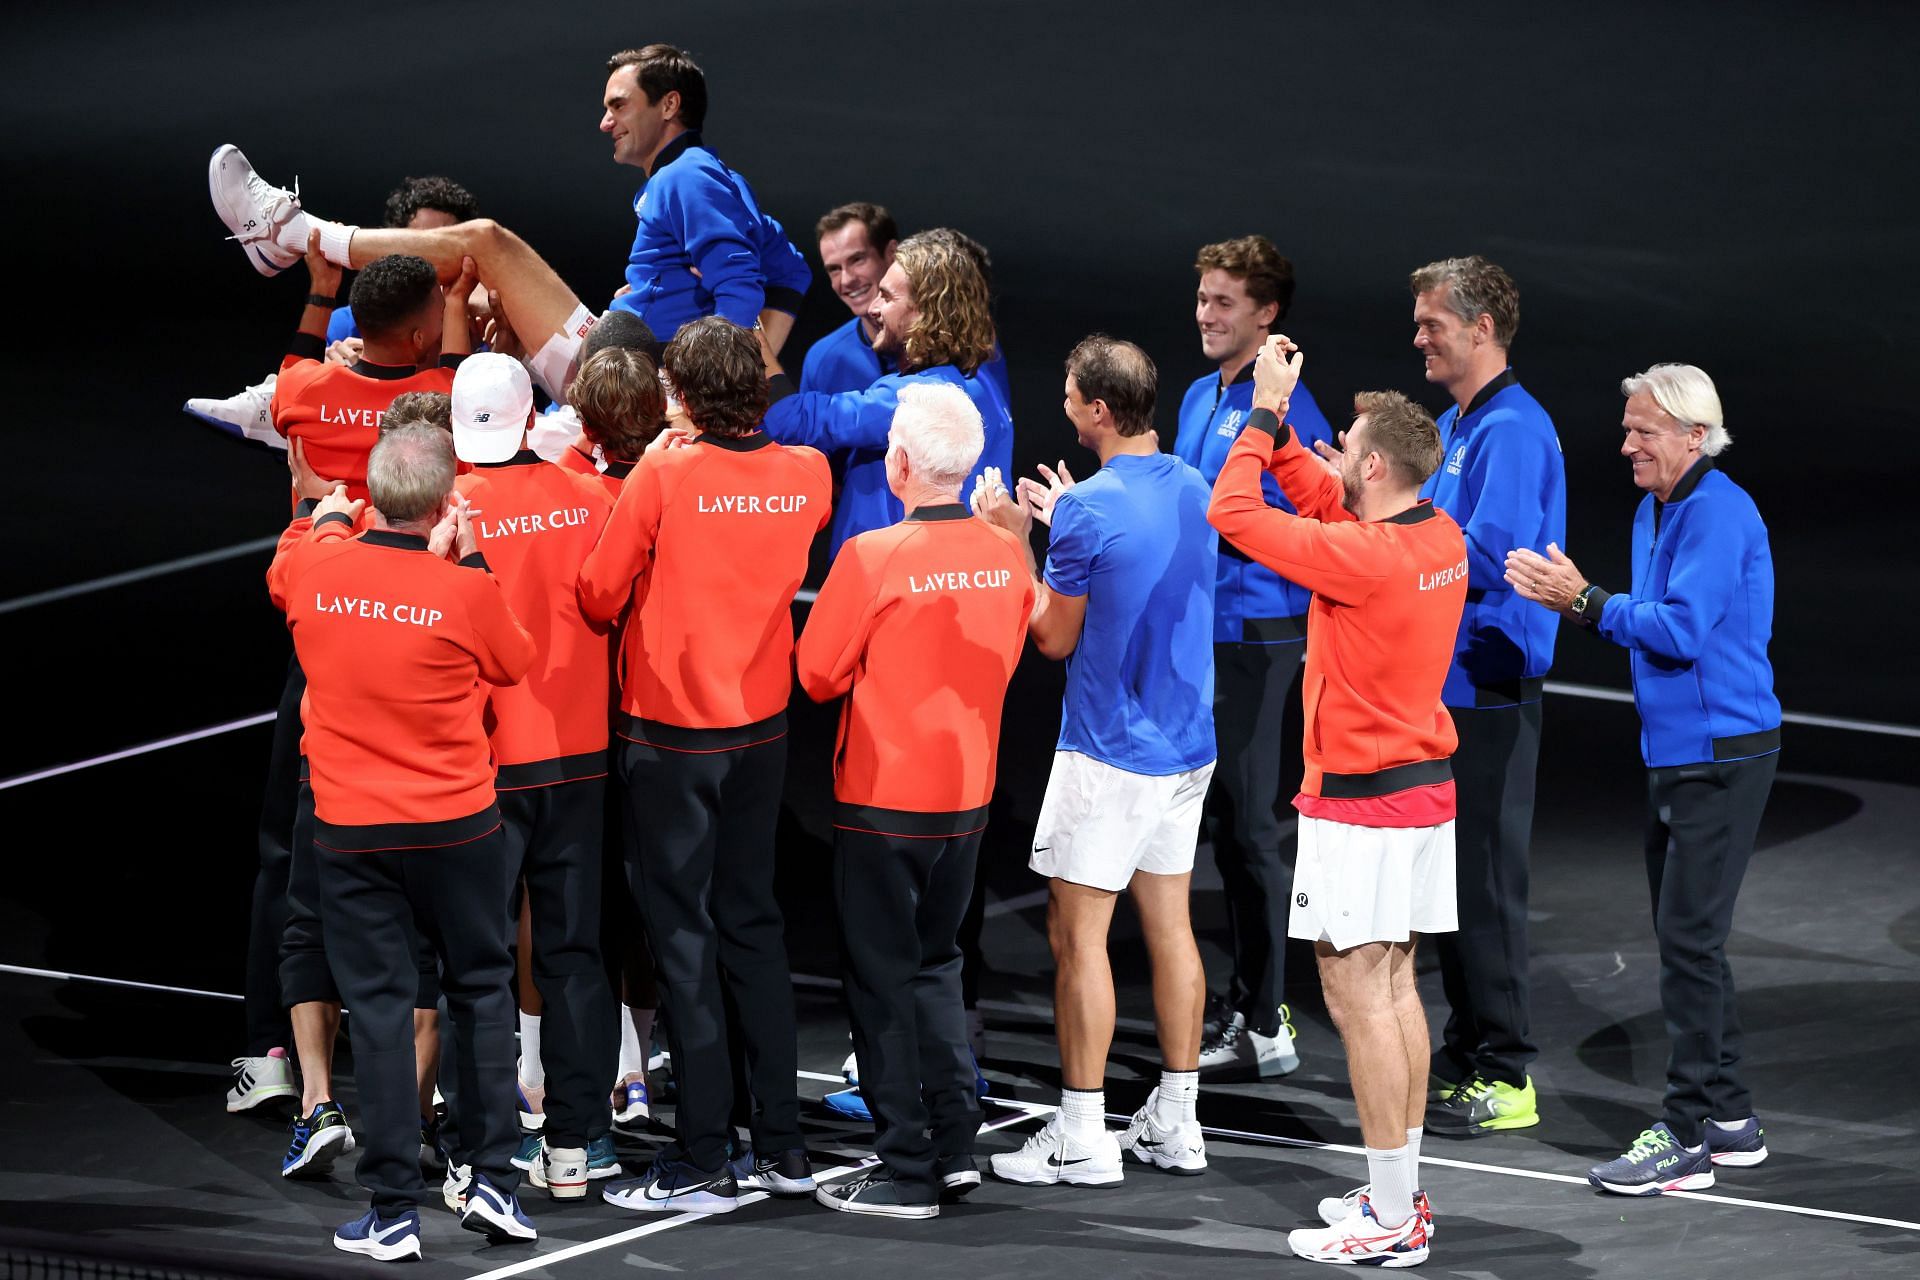 Team World and Team Europe players paid tribute to Roger Federer at the 2022 Laver Cup.